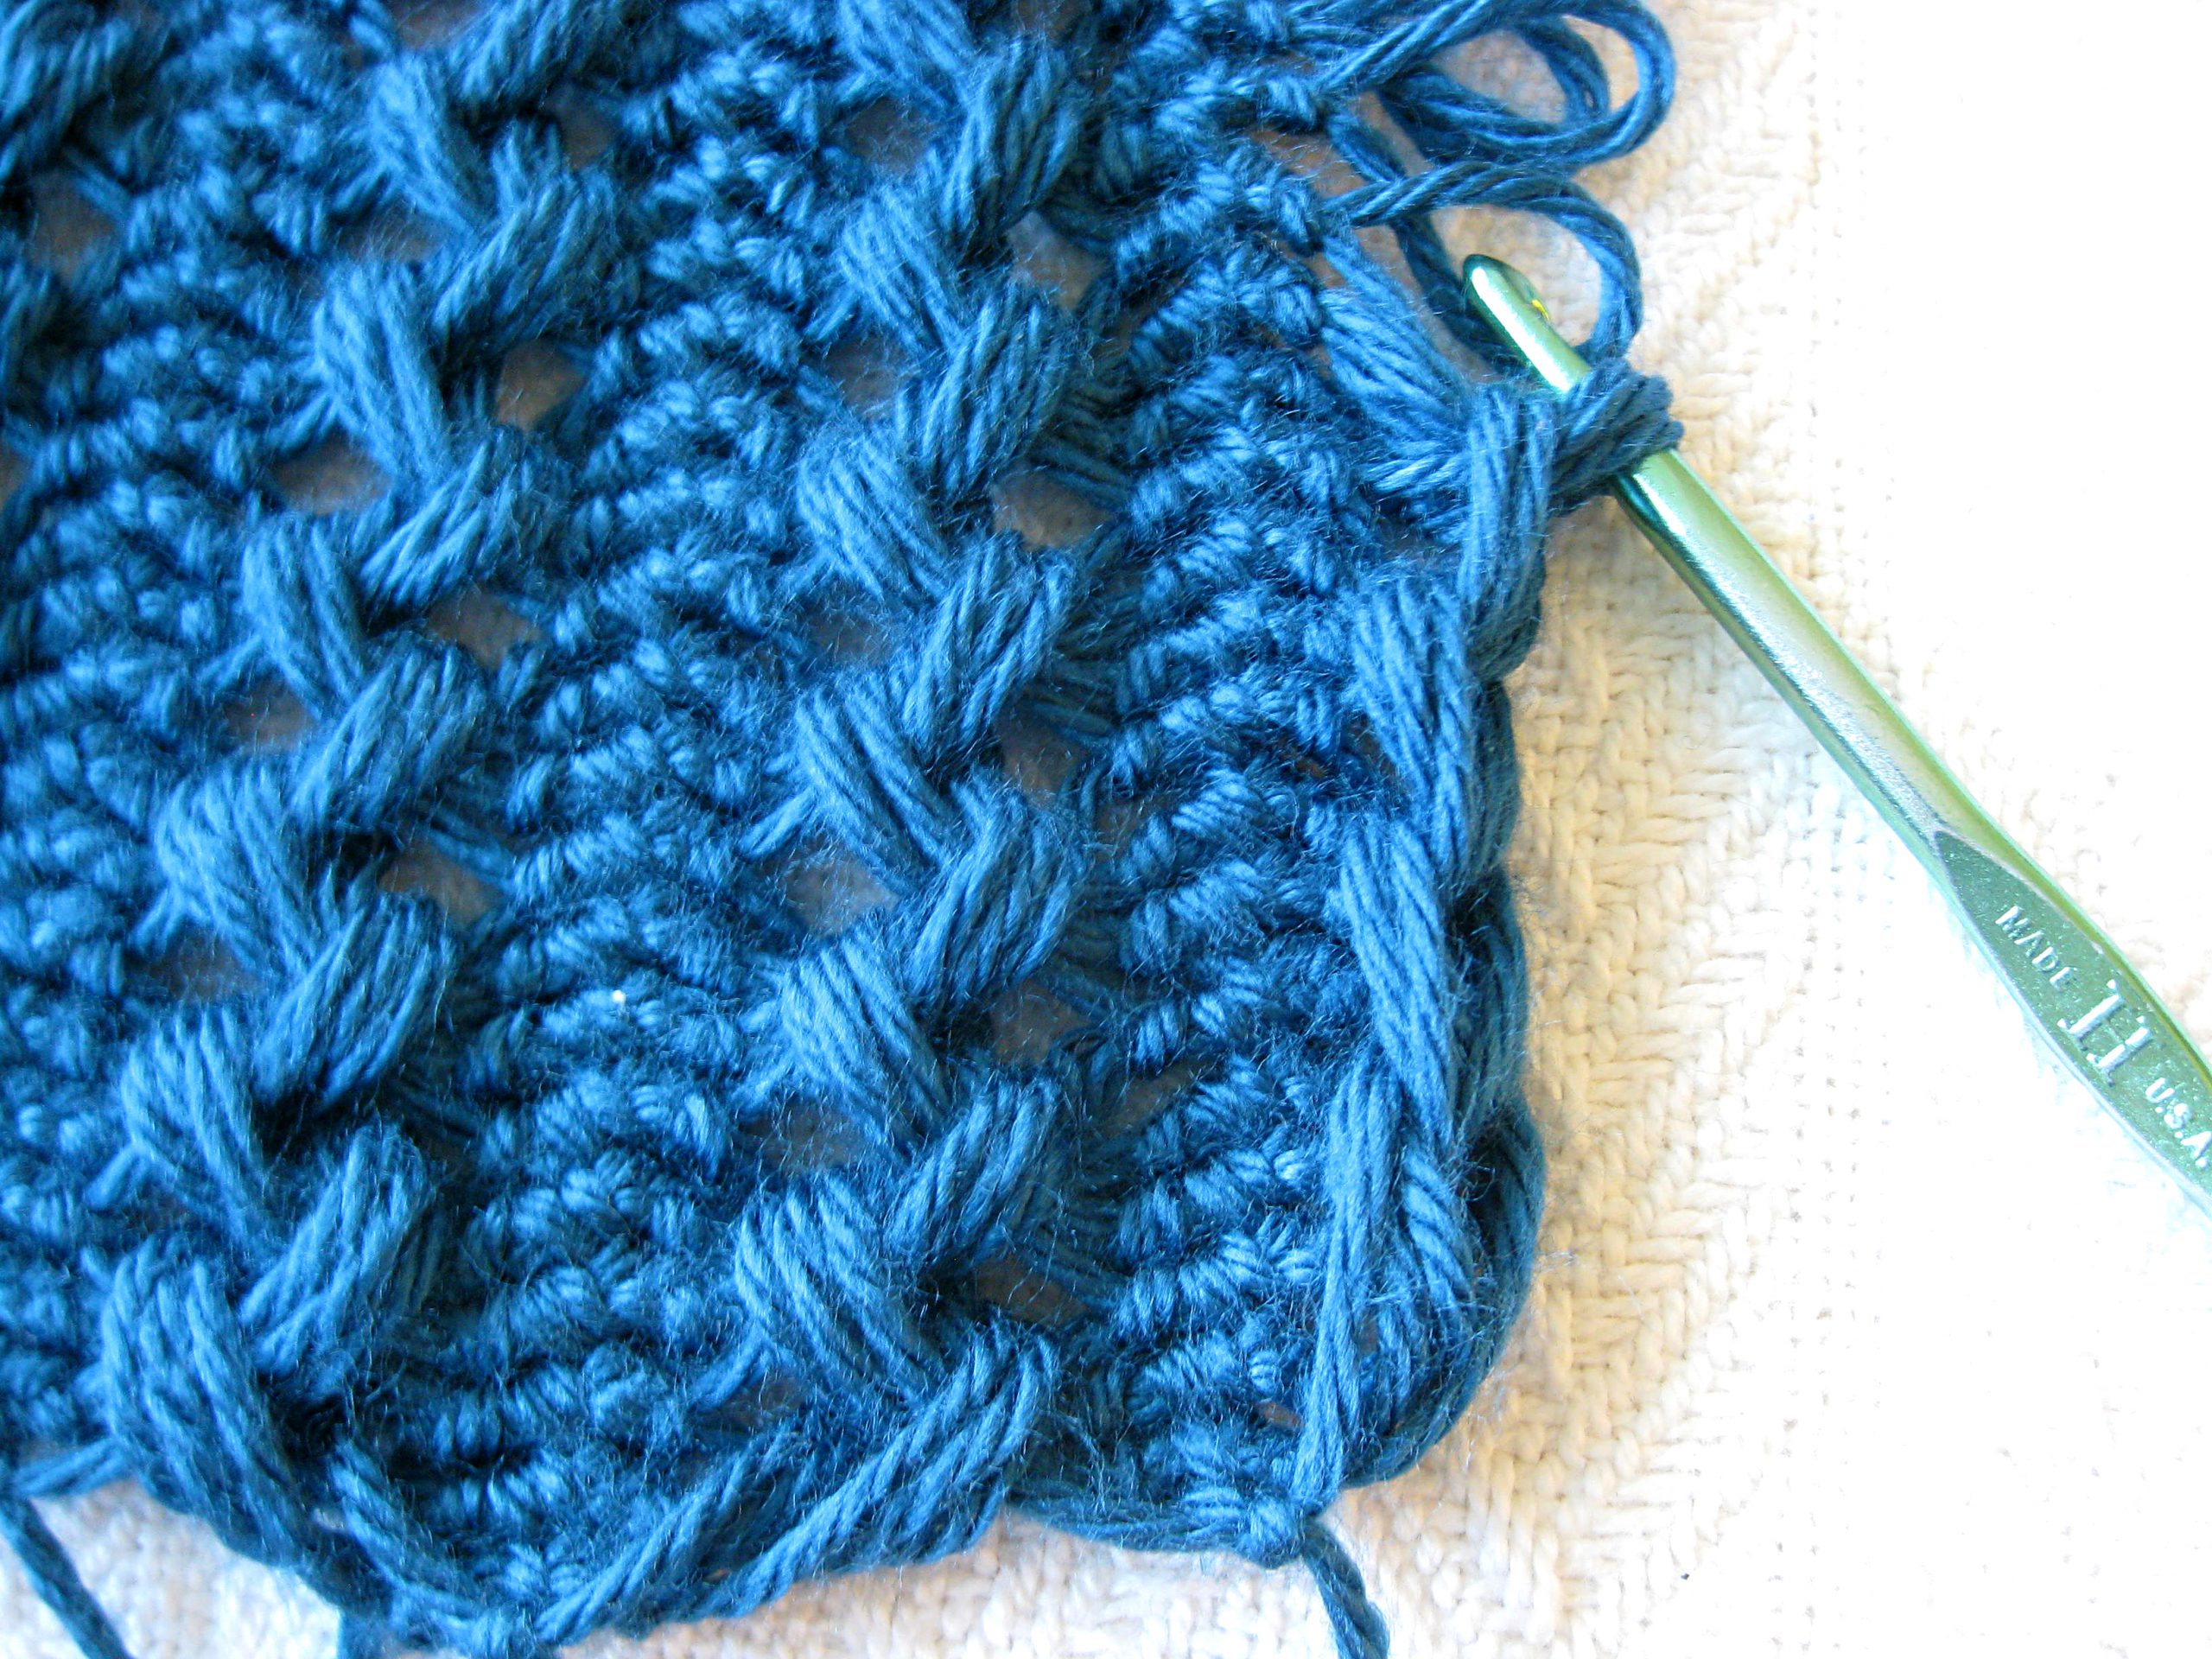 How to Make Hairpin Lace - Make and Join Hairpin Lace - Kickin Crochet